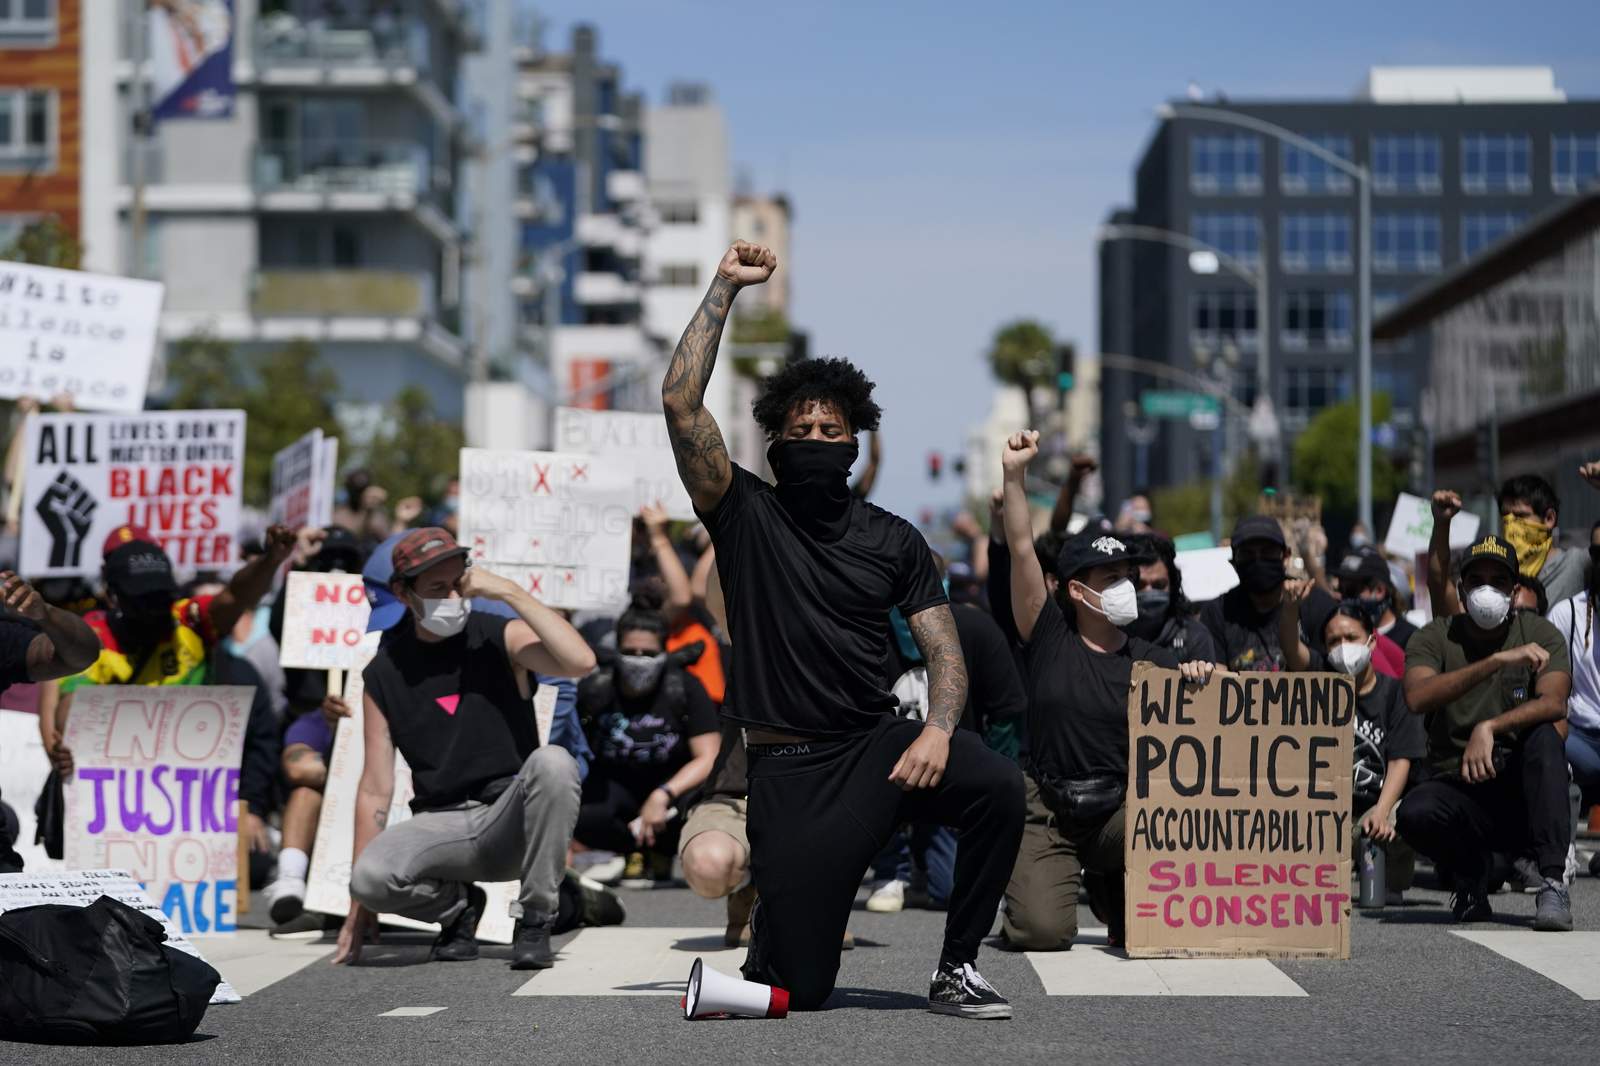 These are some of the most powerful videos coming out of protests across the US